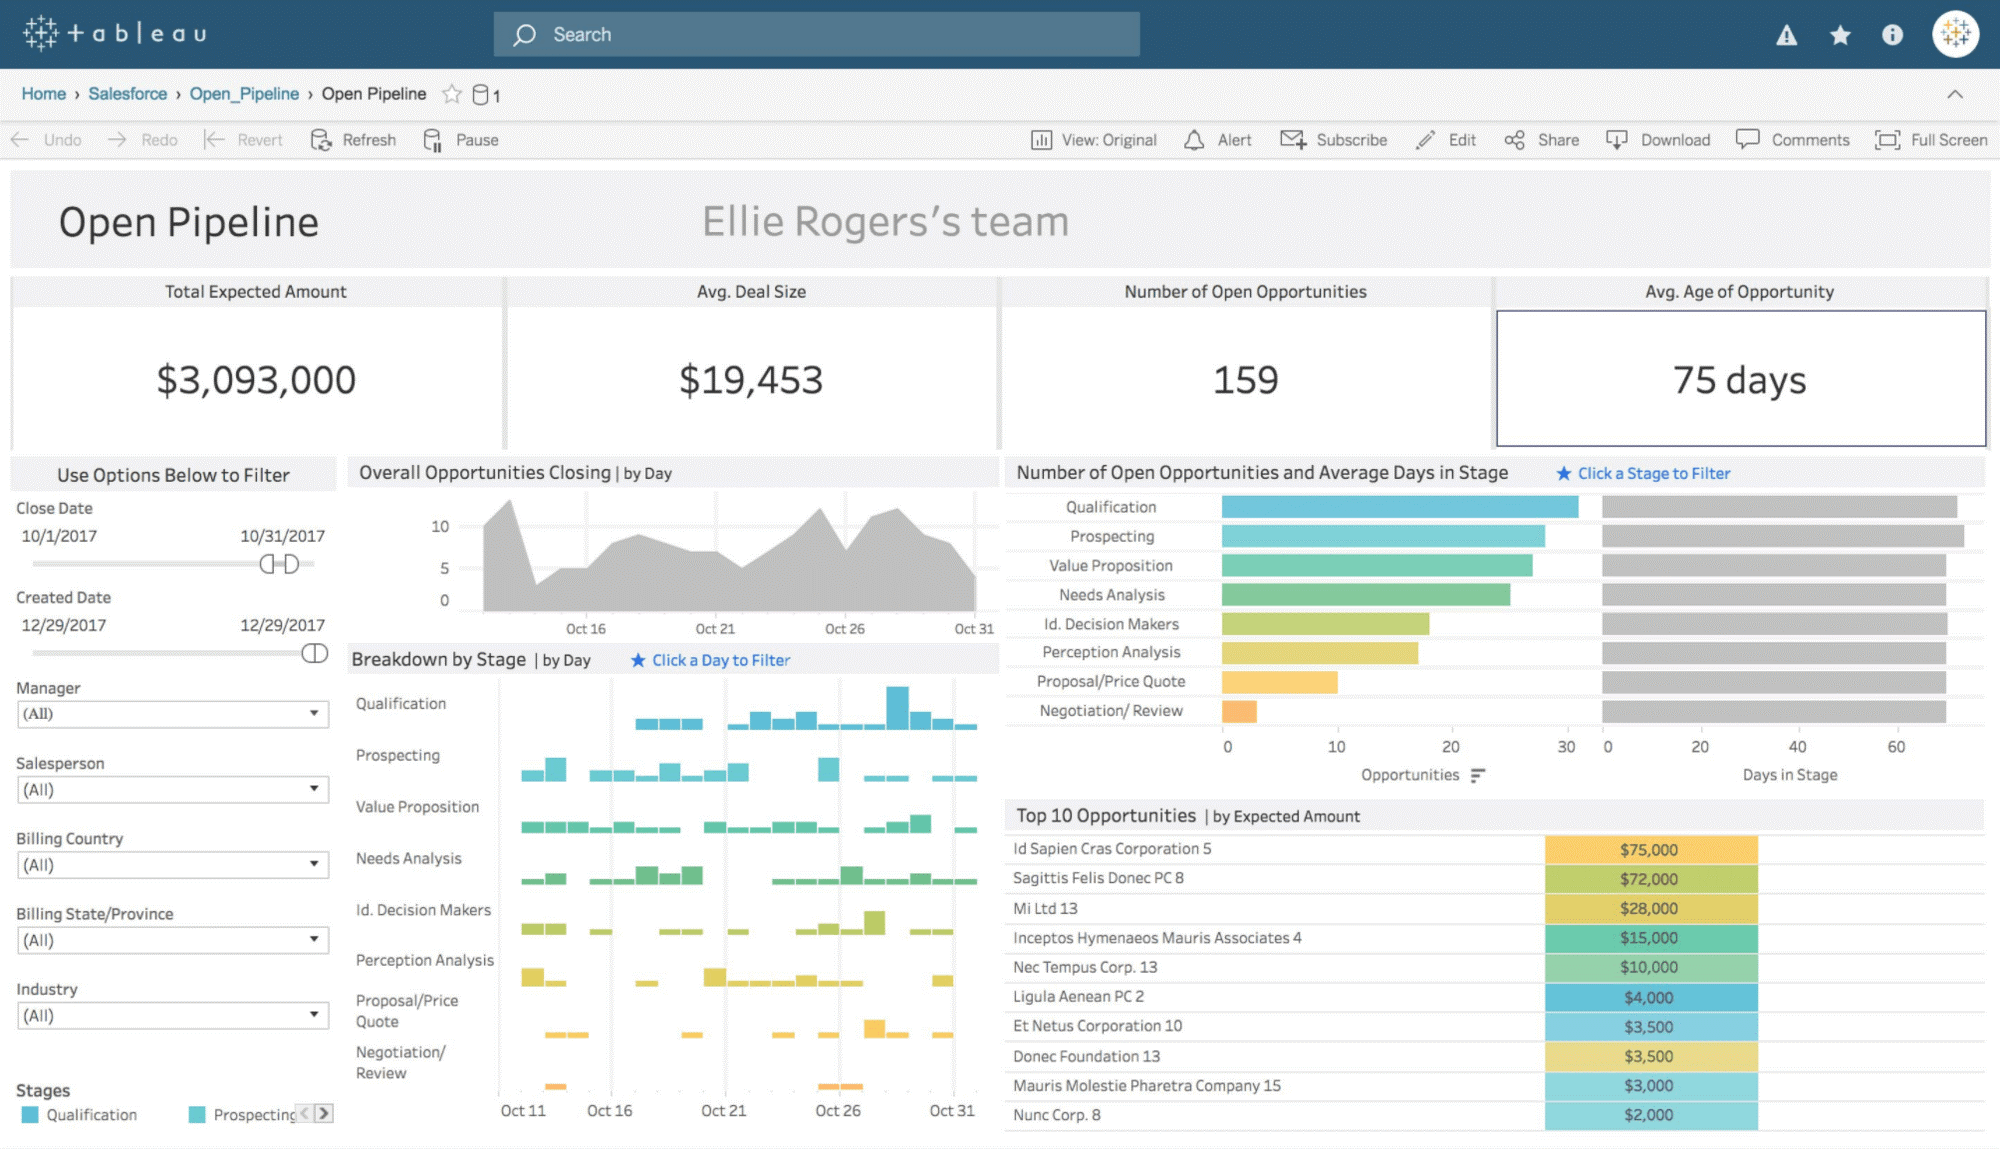 Tableau Declared New report for Data